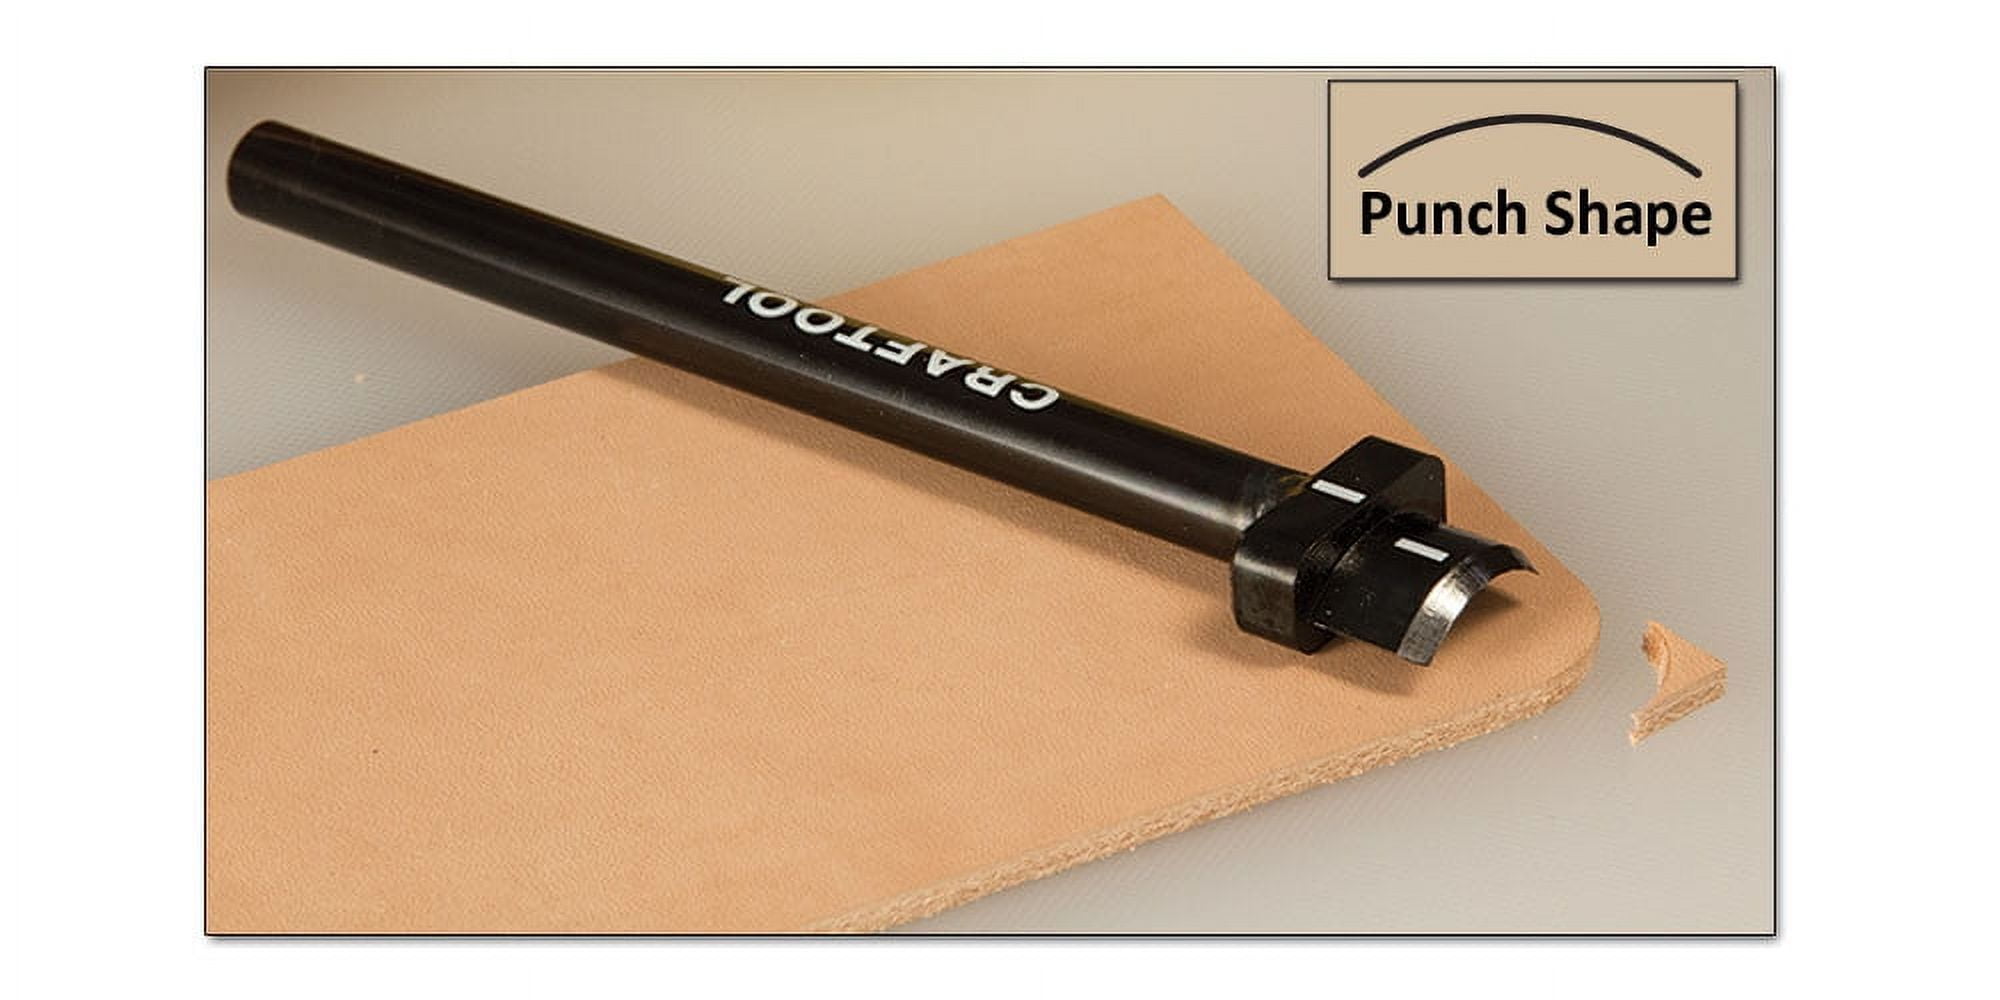 Tandy Leather Craftool� Corner Round Punch Small 9/16 (14 mm) 3780-00 